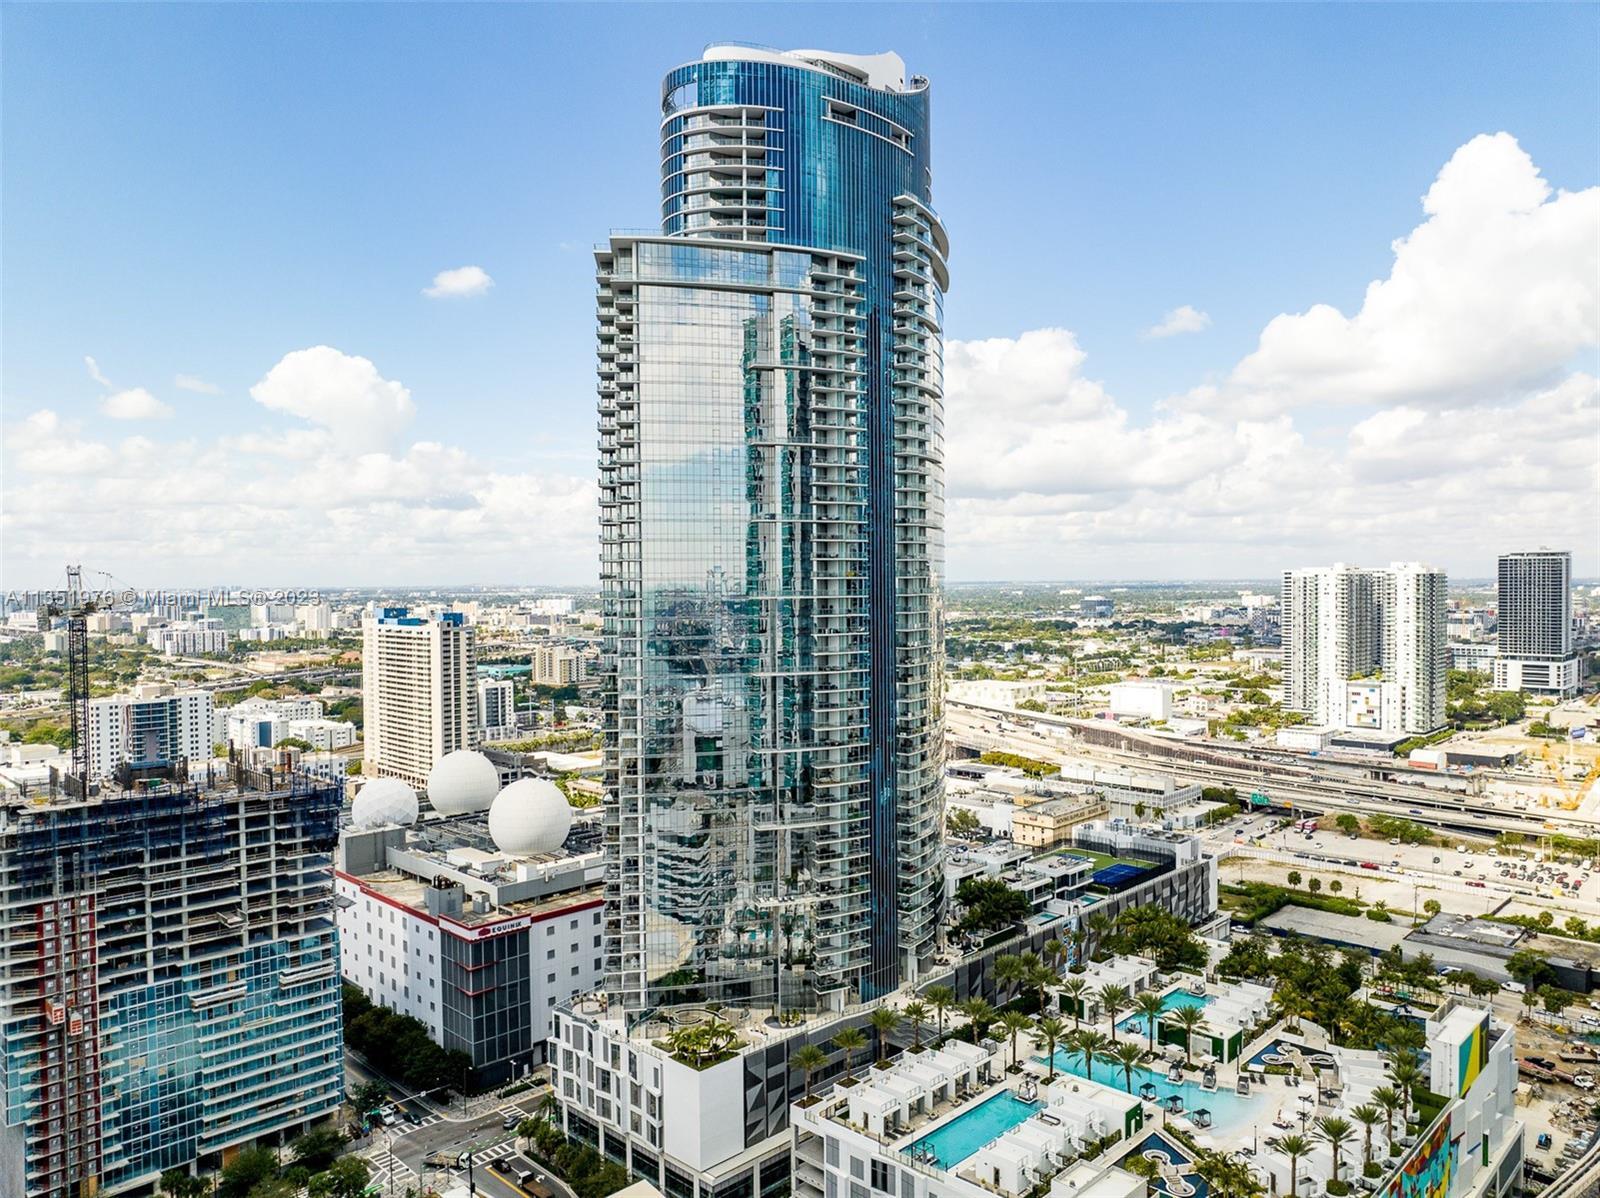 BRING YOUR BEST OFFER AND LIVE LIFE AT THE PARAMOUNT MIAMI, WHERE YOU HAVE ALL YOU NEED TO ENJOY LIF